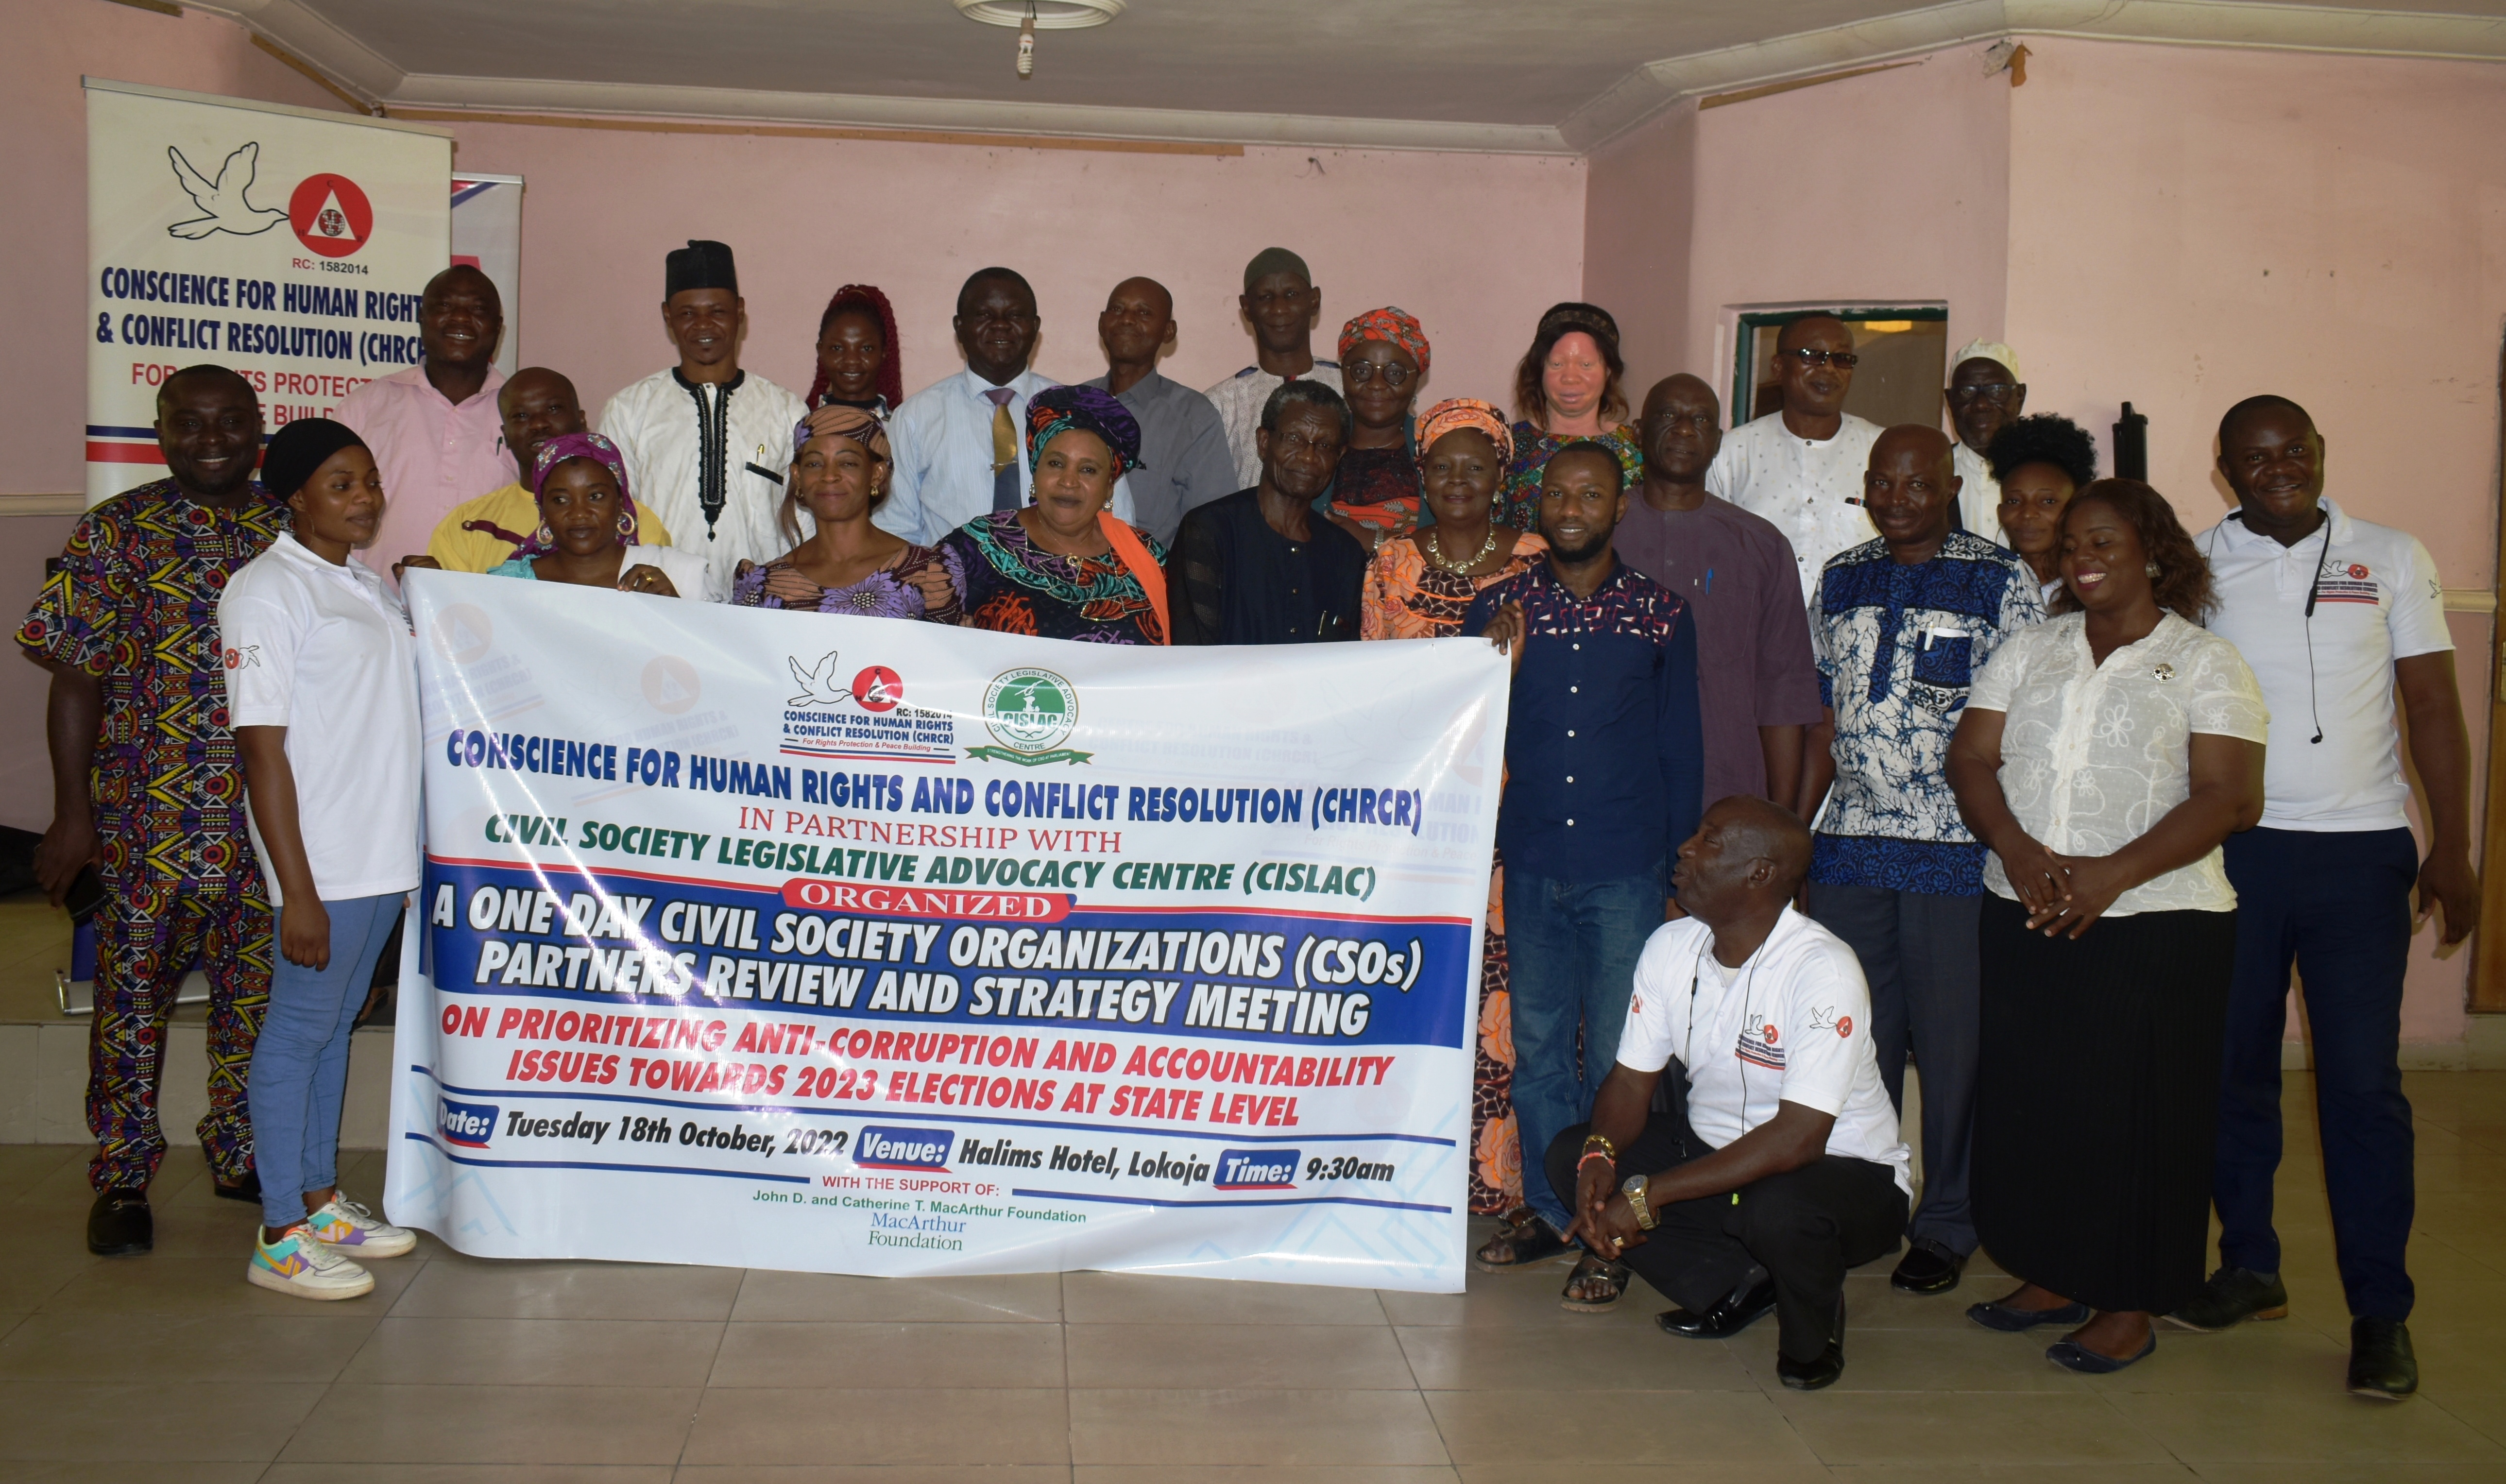 One Day Civil Society Organisations (CSOs) Partners Review and Strategy Meeting  on Prioritizing Anti-Corruption and Accountability issues towards 2023 Elections.